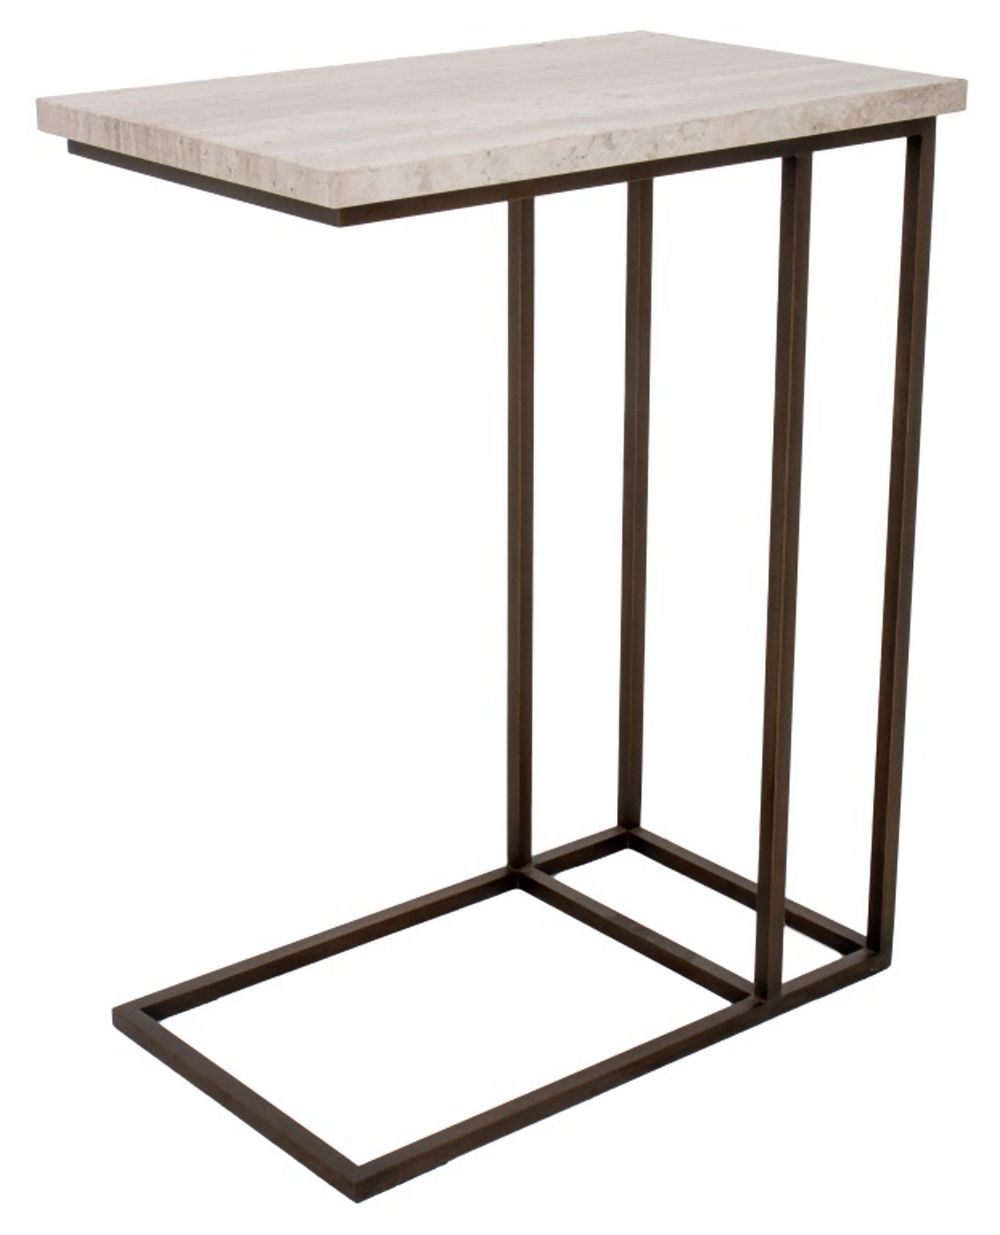 ELIEEN GRAY STYLE END TABLE 21ST 3ce836